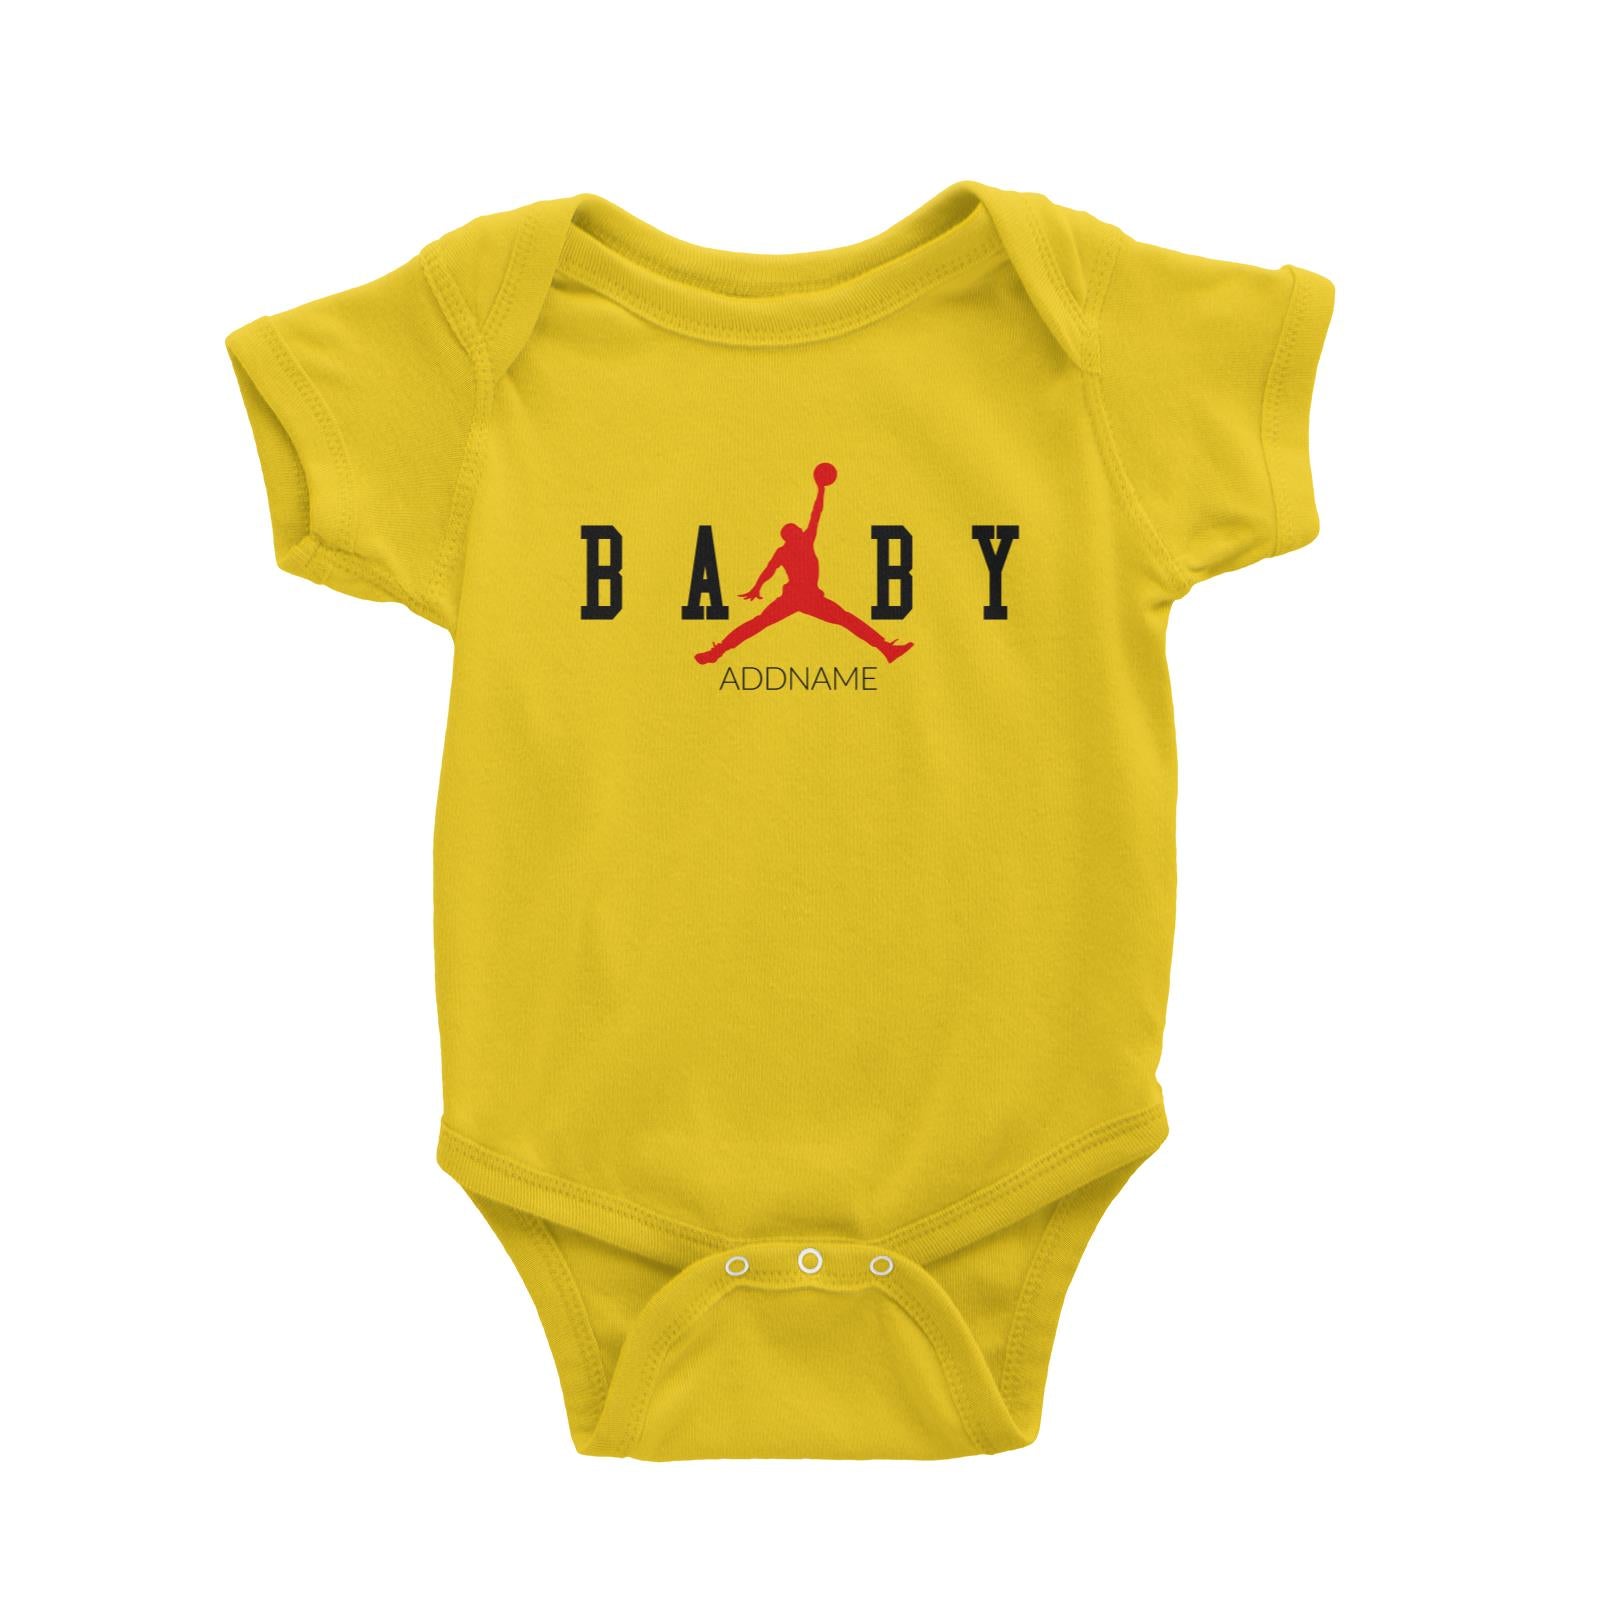 Streetwear Basketball Baby Addname Baby Romper